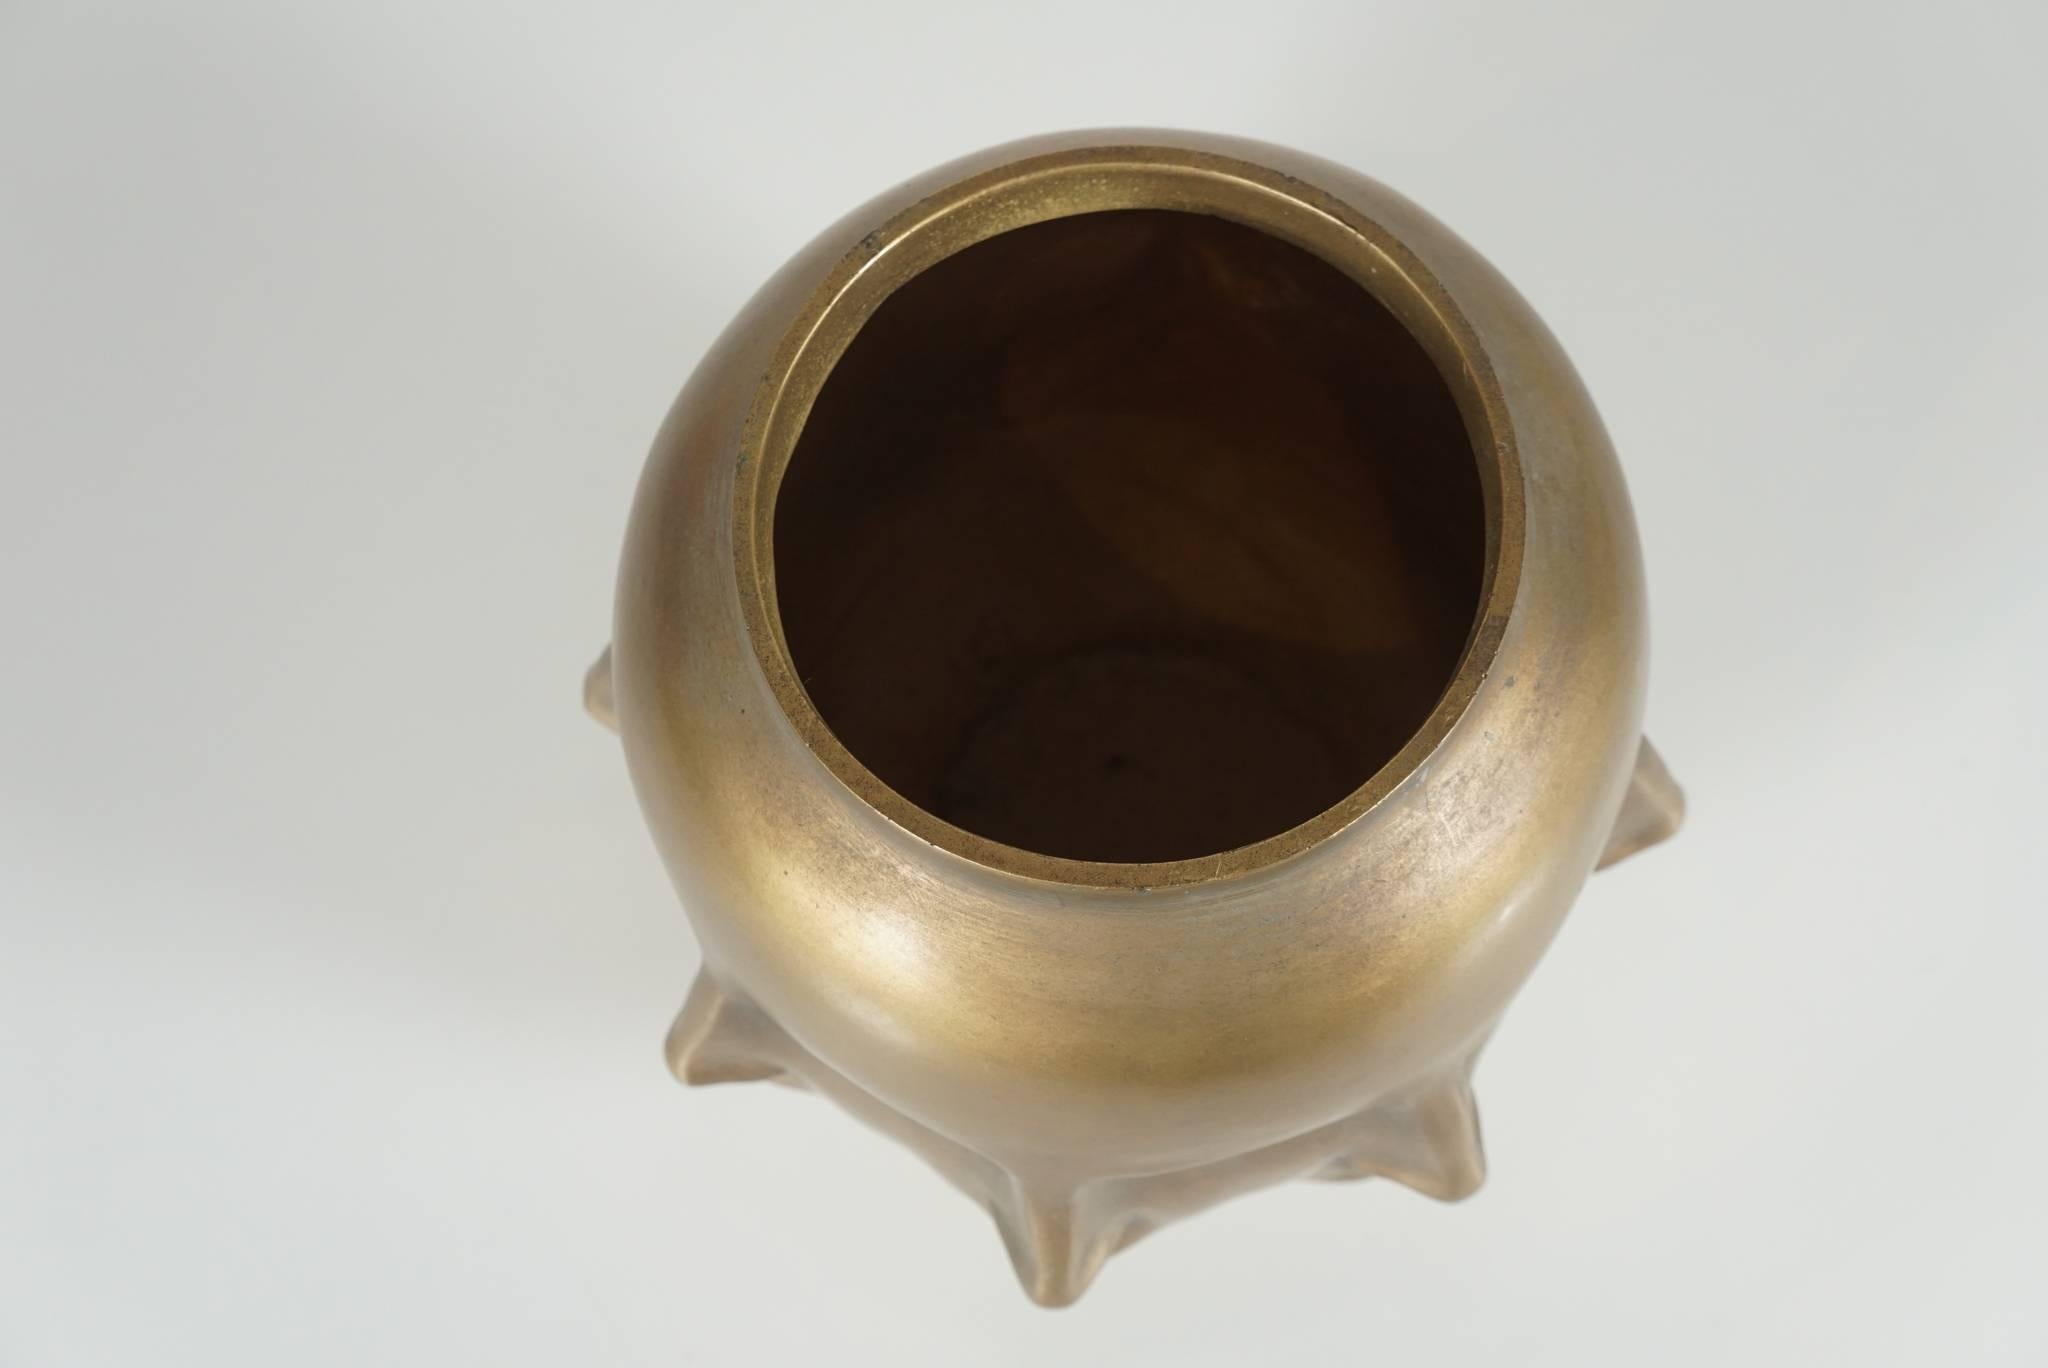 Dora Maar Vase in Gold In Excellent Condition For Sale In Hudson, NY